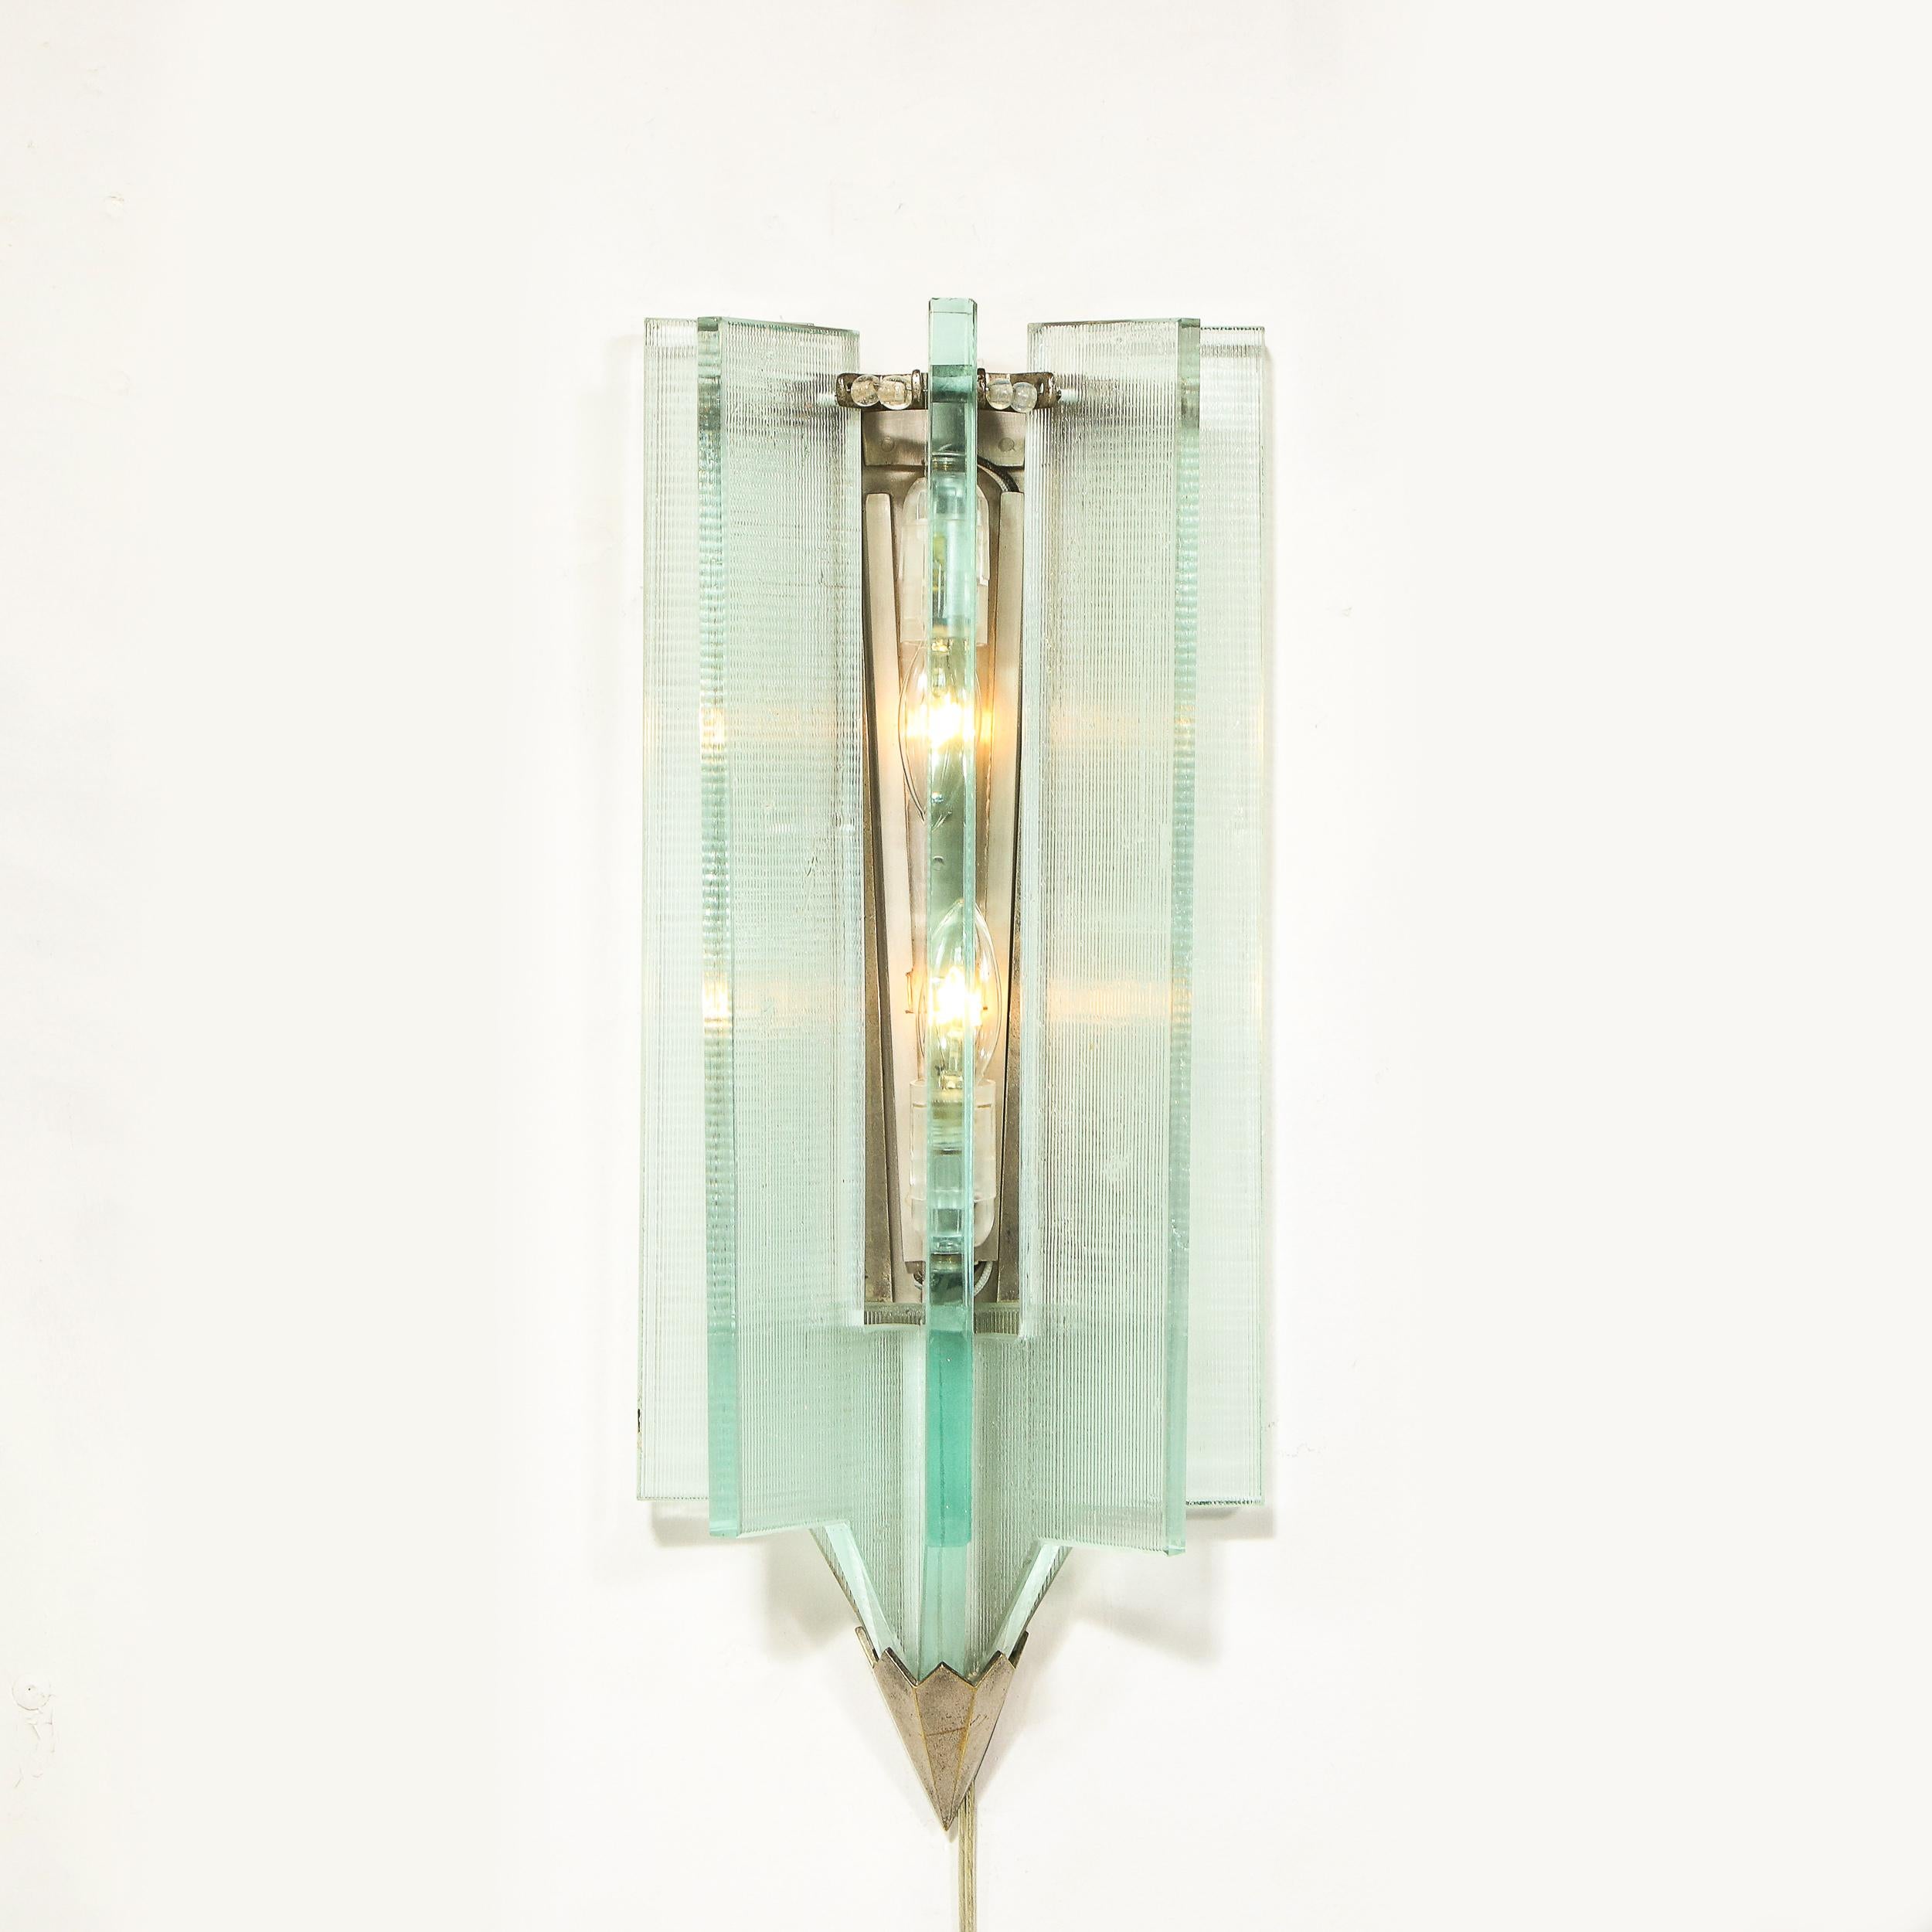 Italian Mid-Century Modern Glass & Antique Nickel Sconce in the Manner of Fontana Arte For Sale